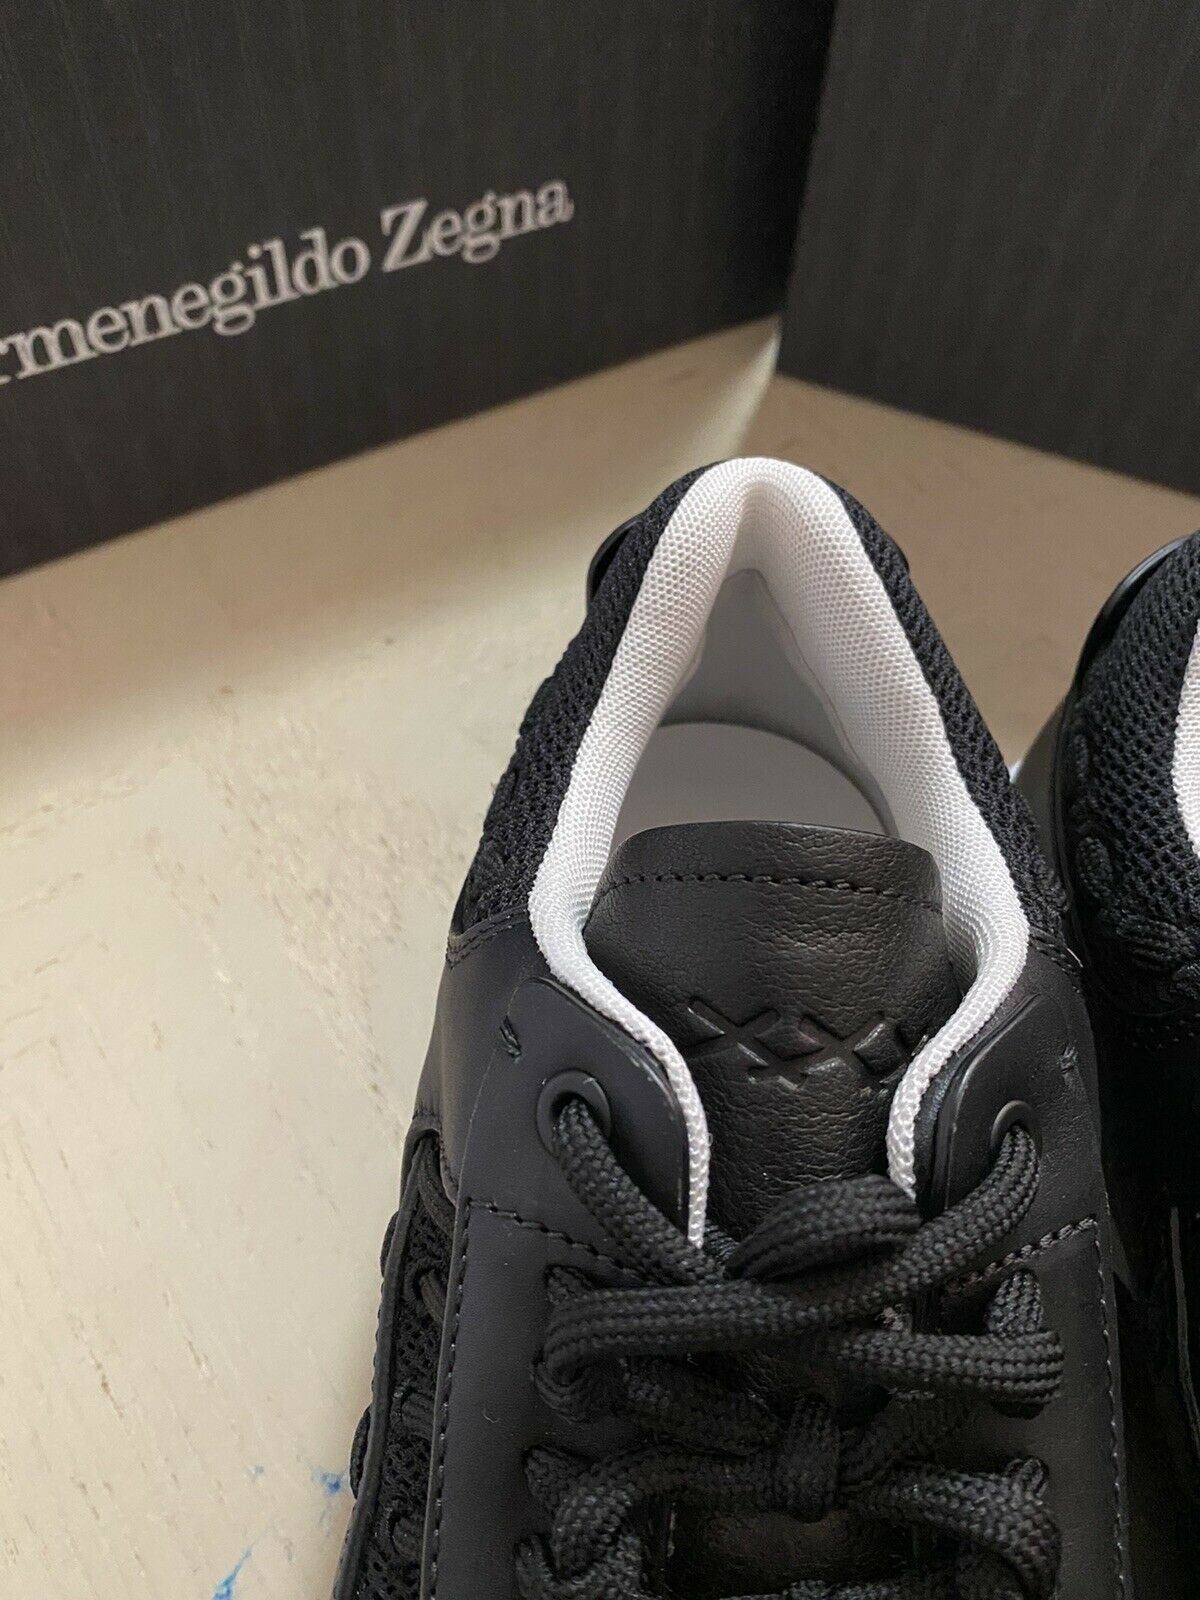 New $850 Ermenegildo Zegna Couture Leather Sneakers Shoes Black 9.5 US Italy